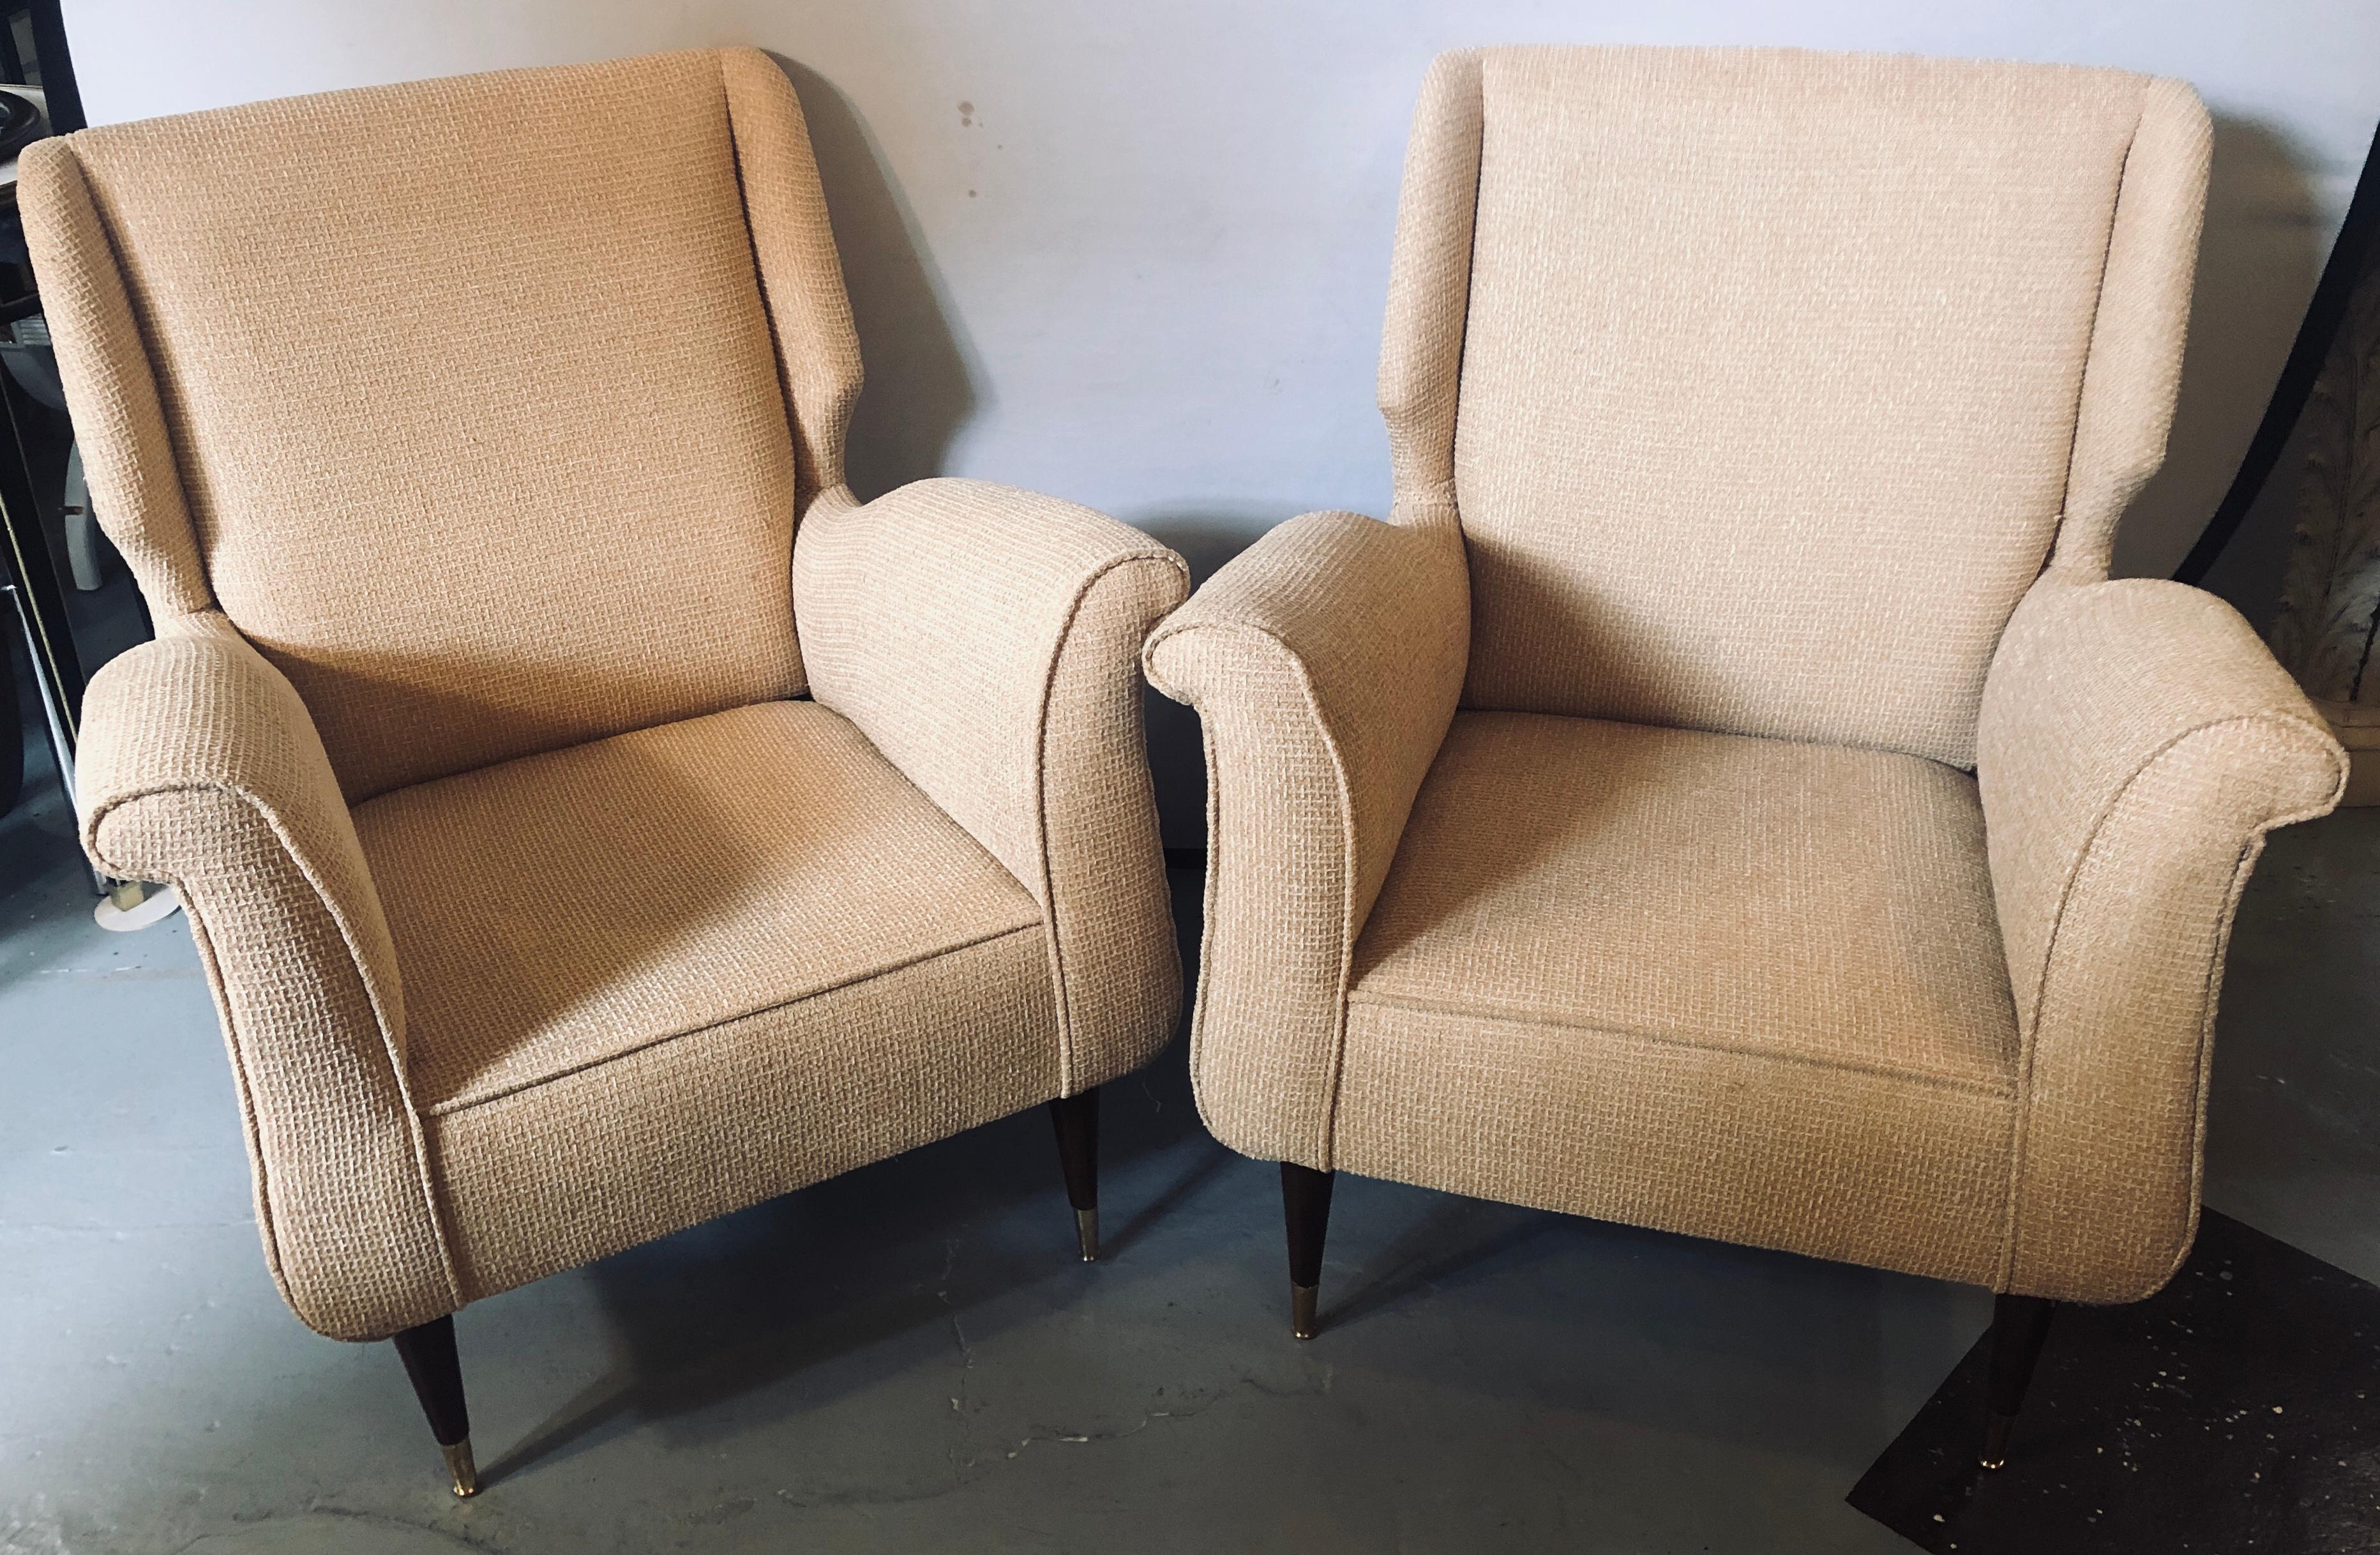 Pair of Mid-Century Modern Gio Ponti style arm or wing back chairs. These finely detailed sleek and stylish arm chairs depict this iconic designers style for flair and simplicity at his highest level. The tapering mahogany legs sitting on brass